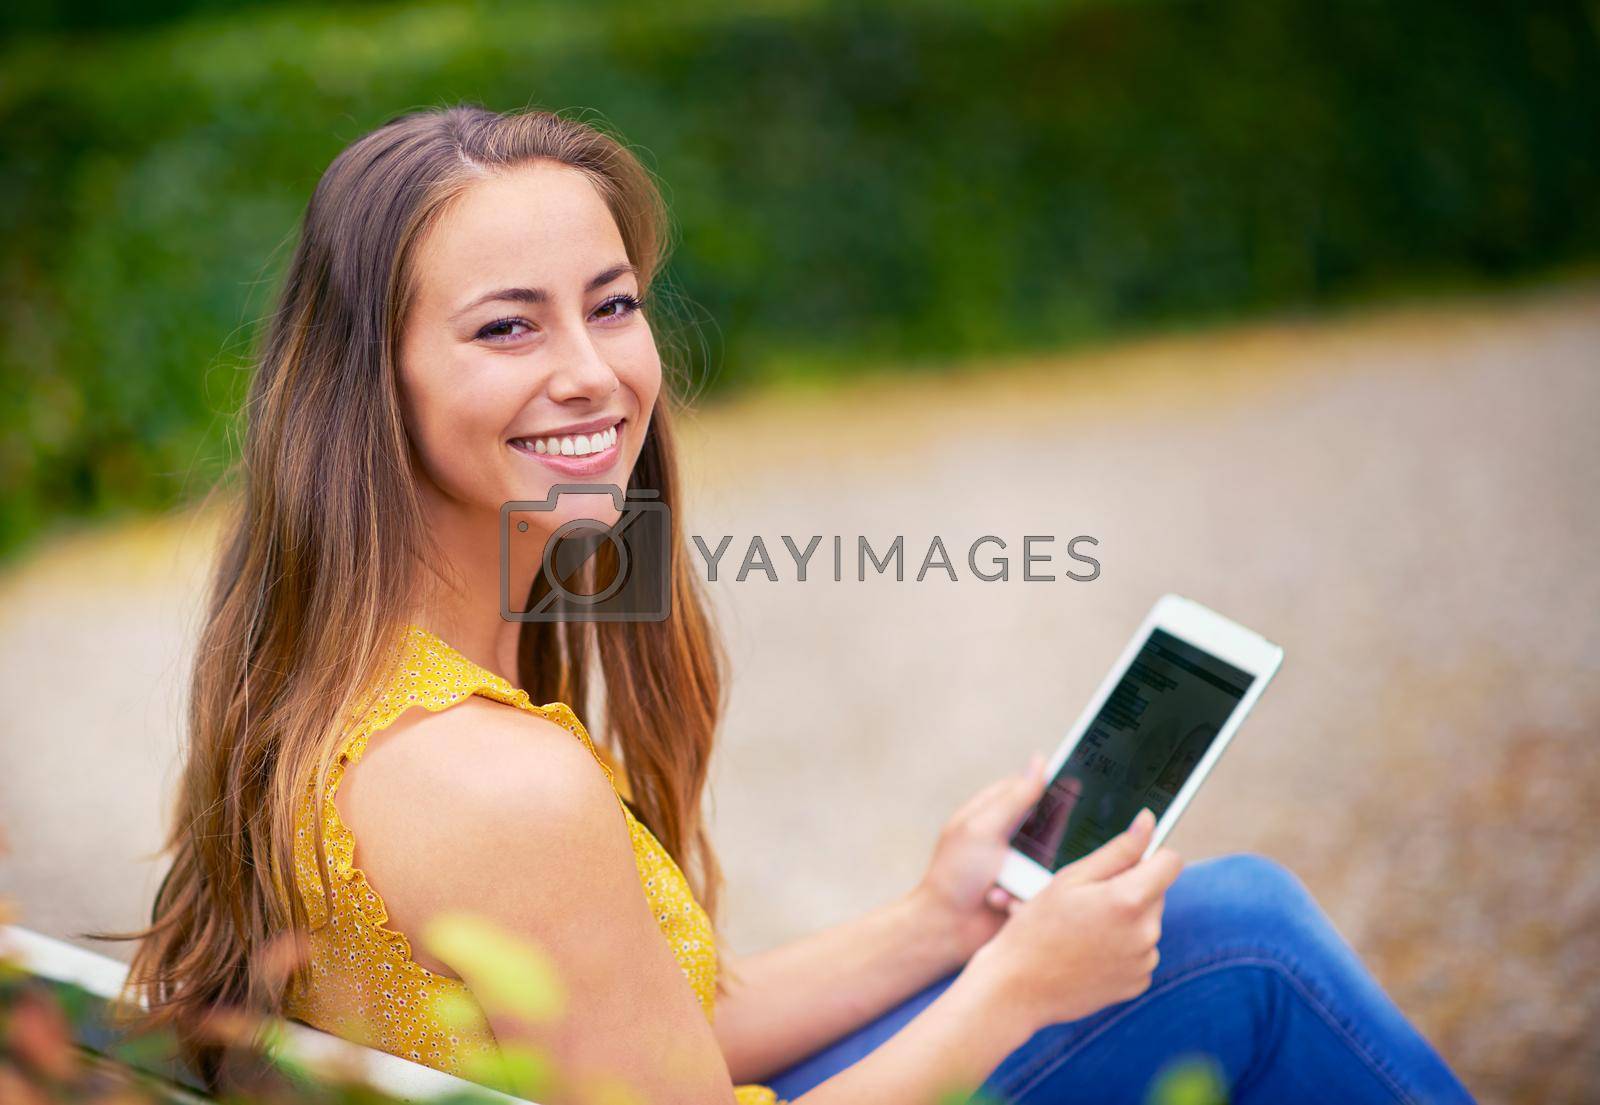 Royalty free image of I took my tablet to the park. a young woman using a digital tablet at the park. by YuriArcurs